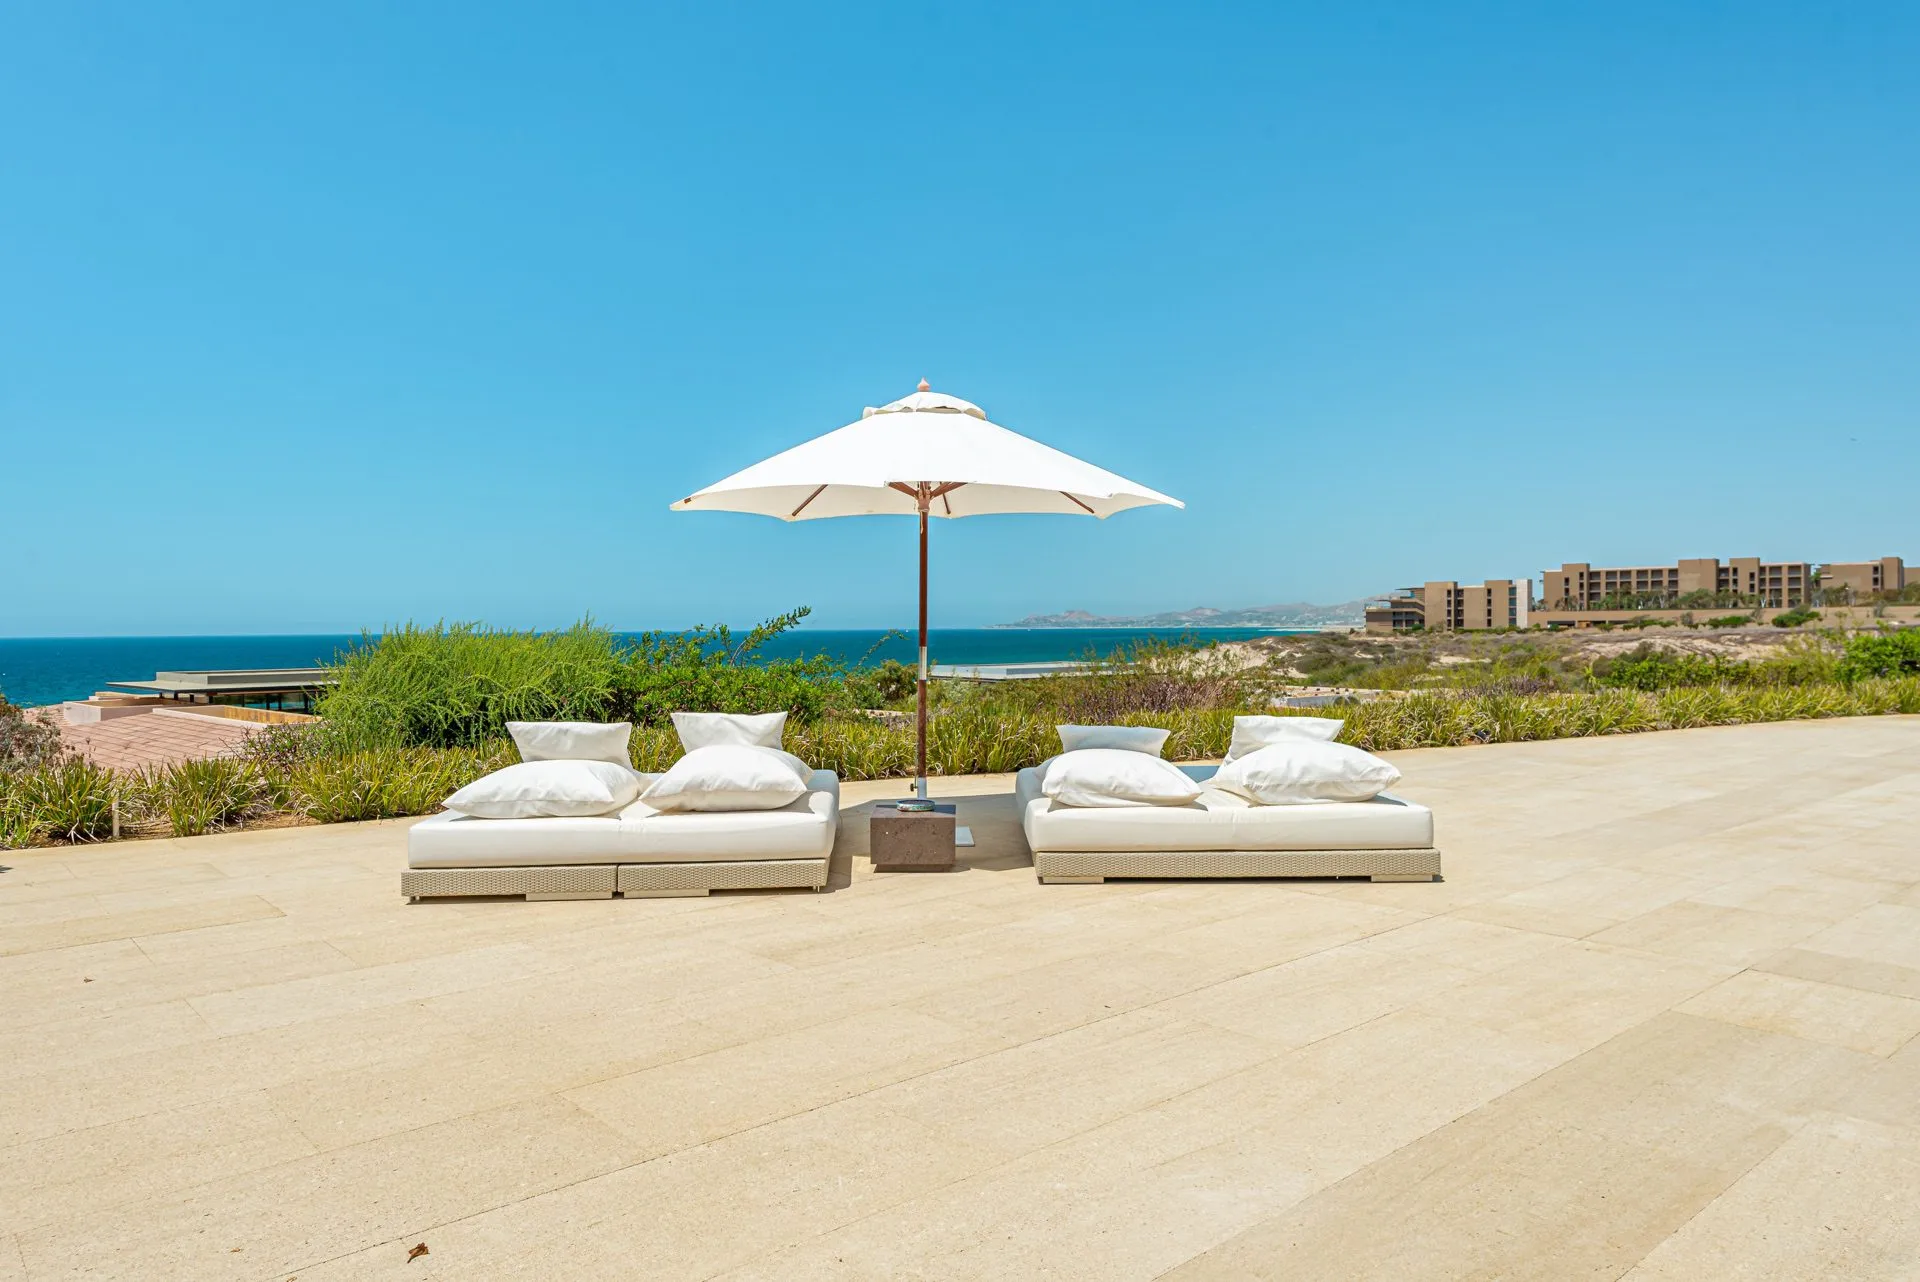 West Enclave 10 is a Ritz-Carlton Reserve branded oceanview residence located in San Jose del Cabo. One of the only twenty-seven villas, this residence was launched for the first time in fall 2021 to the open market as available for purchase.